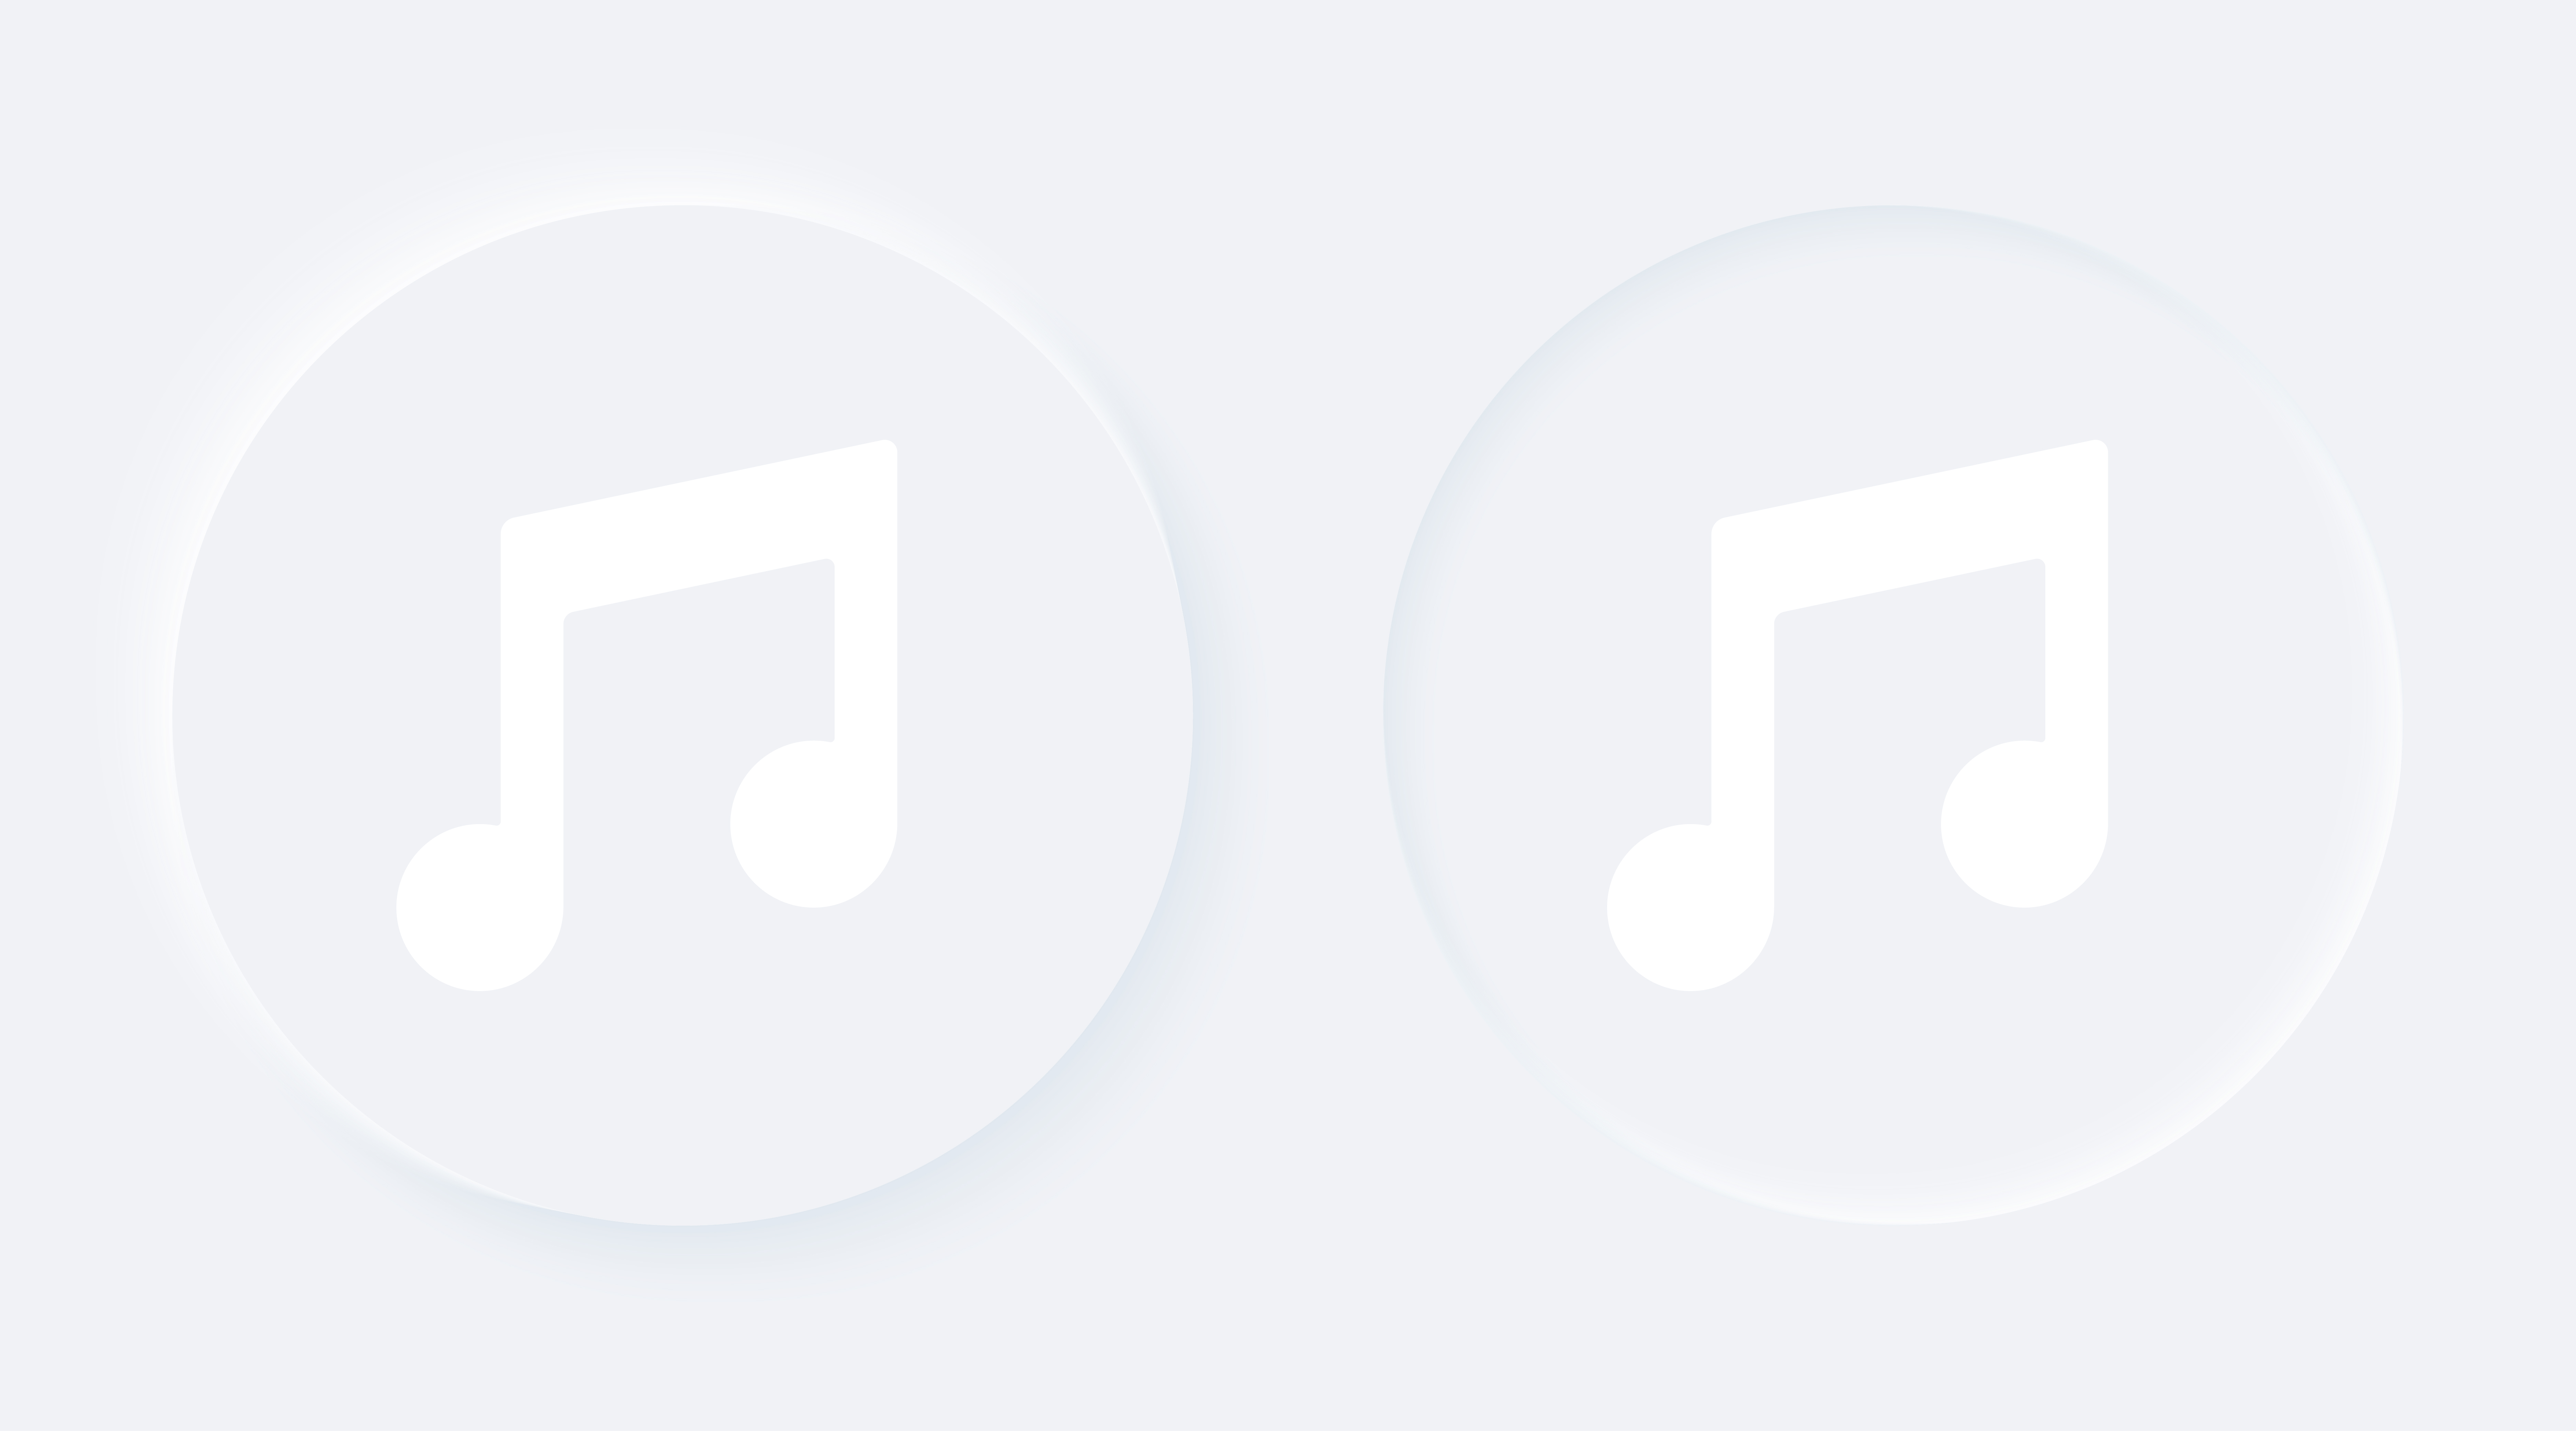 Music note key icon. Bright white gradient button. Internet song melody on circle shape symbol. Push click media player. Neumorphic effect icon